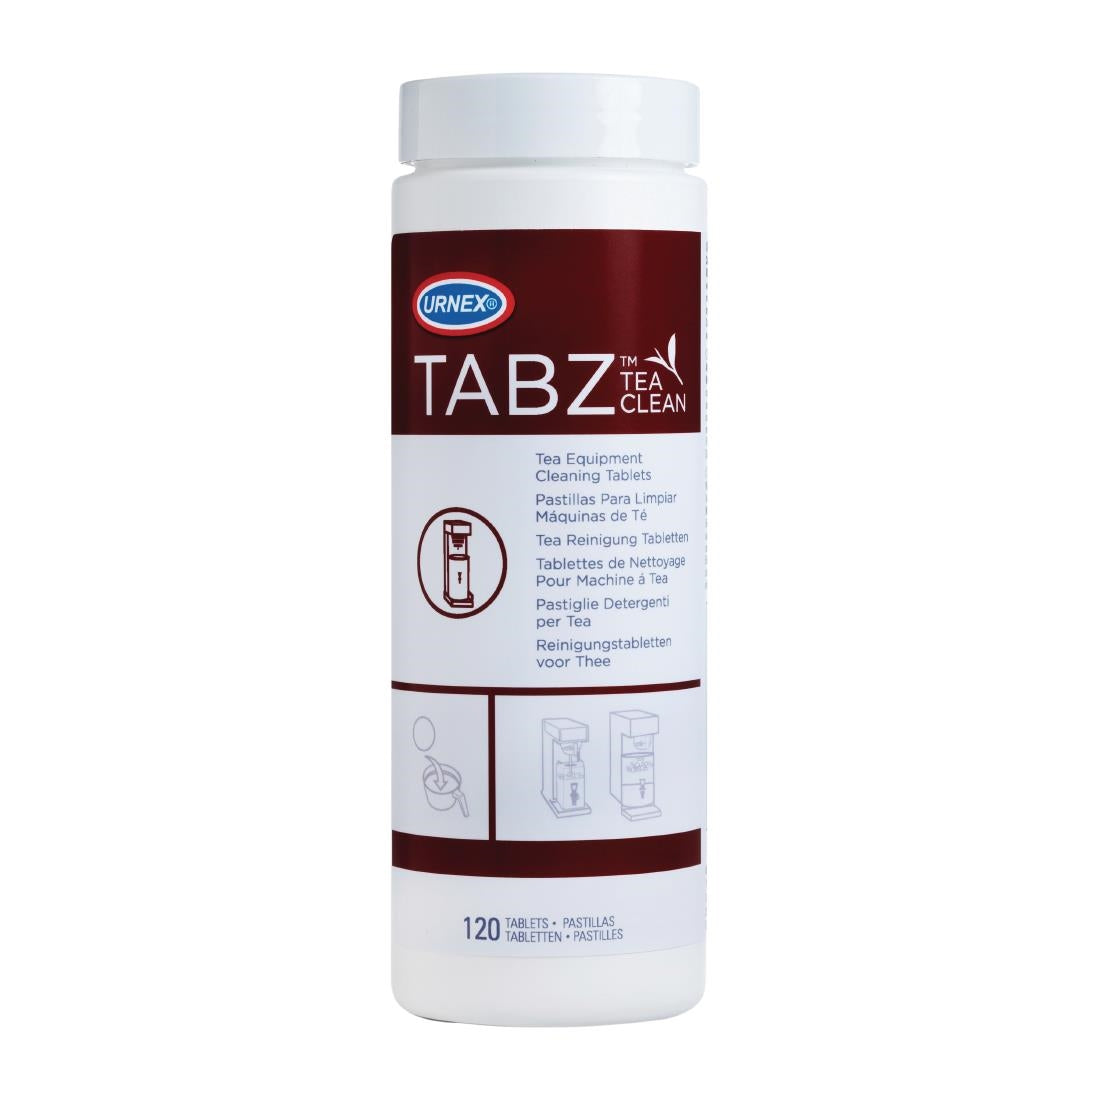 CX511 Urnex Tabz Tea Equipment Cleaner Tablets 4g (Pack of 120) JD Catering Equipment Solutions Ltd